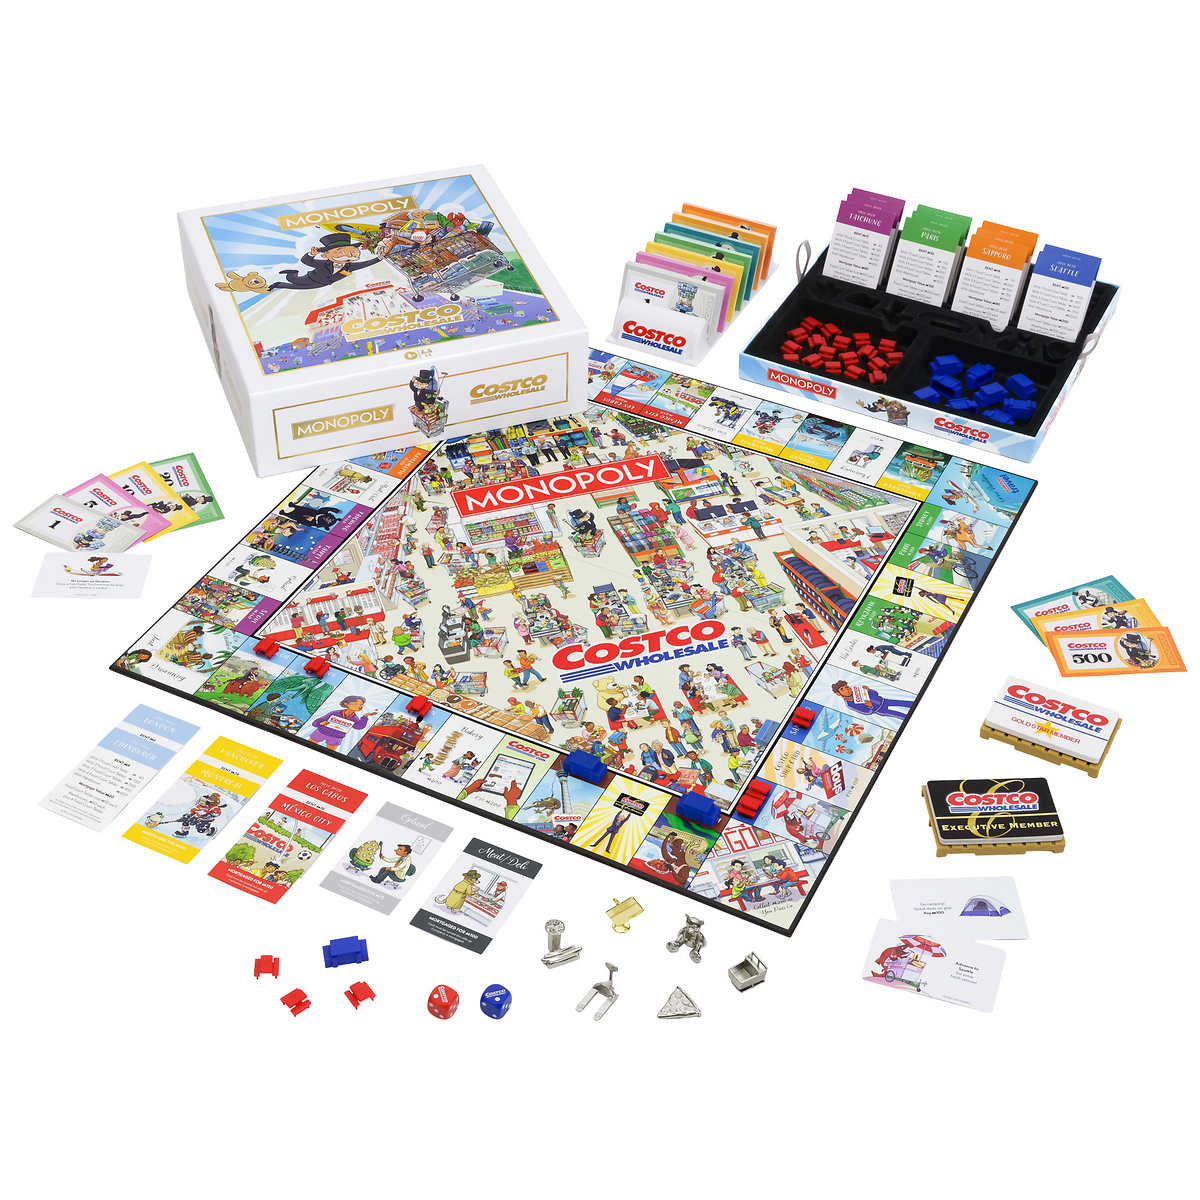 monopoly-édition-costco-version-francaise-edition-french-4